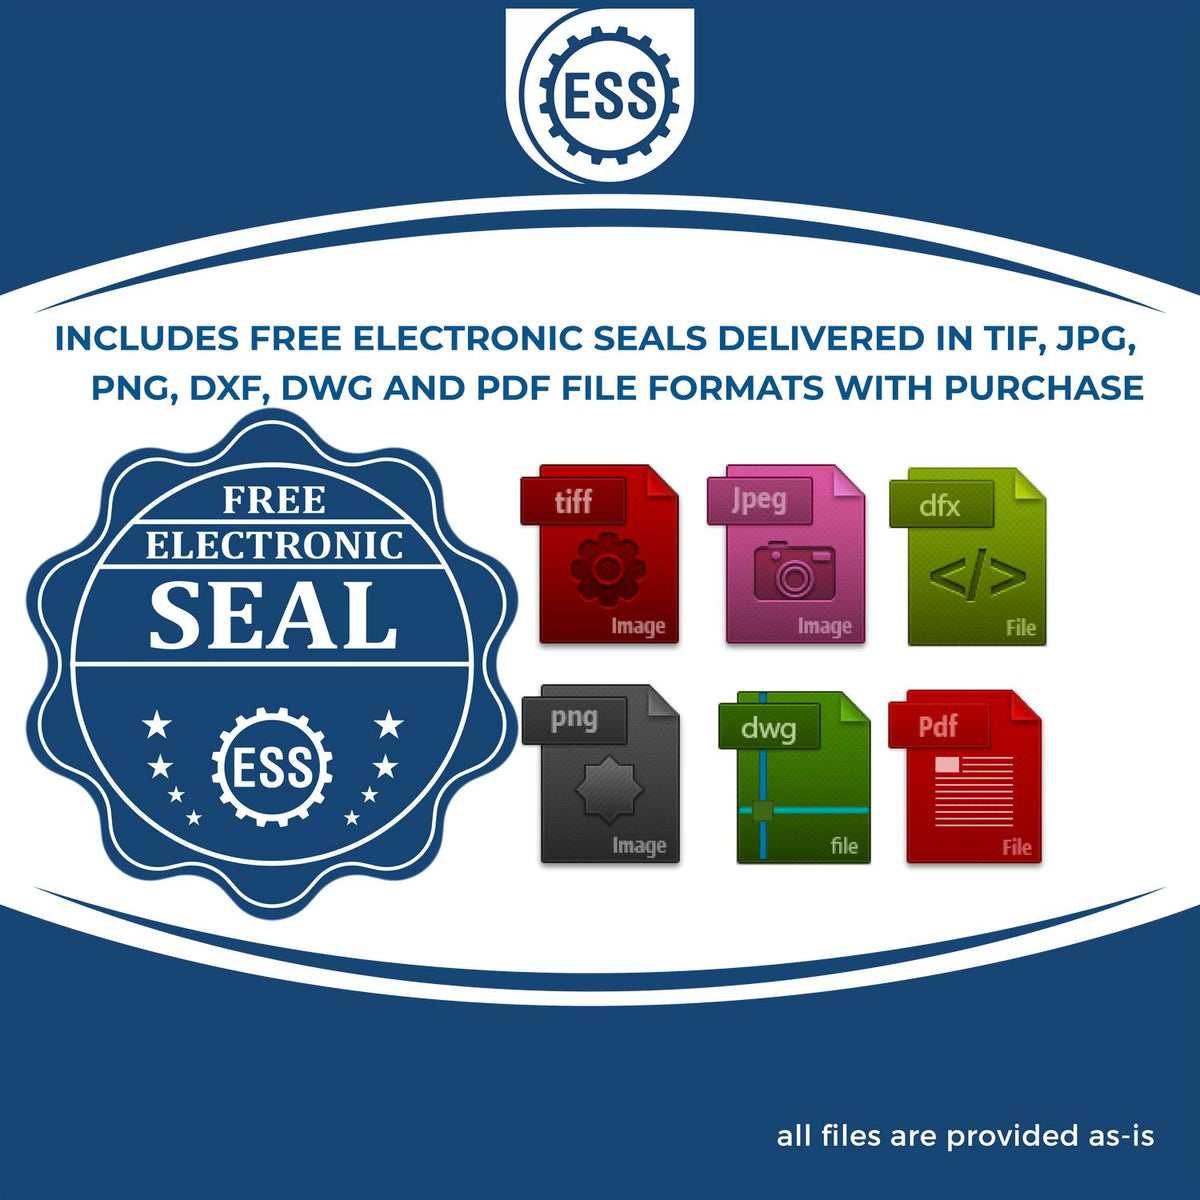 An infographic for the free electronic seal for the Extended Long Reach Arkansas Surveyor Embosser illustrating the different file type icons such as DXF, DWG, TIF, JPG and PNG.